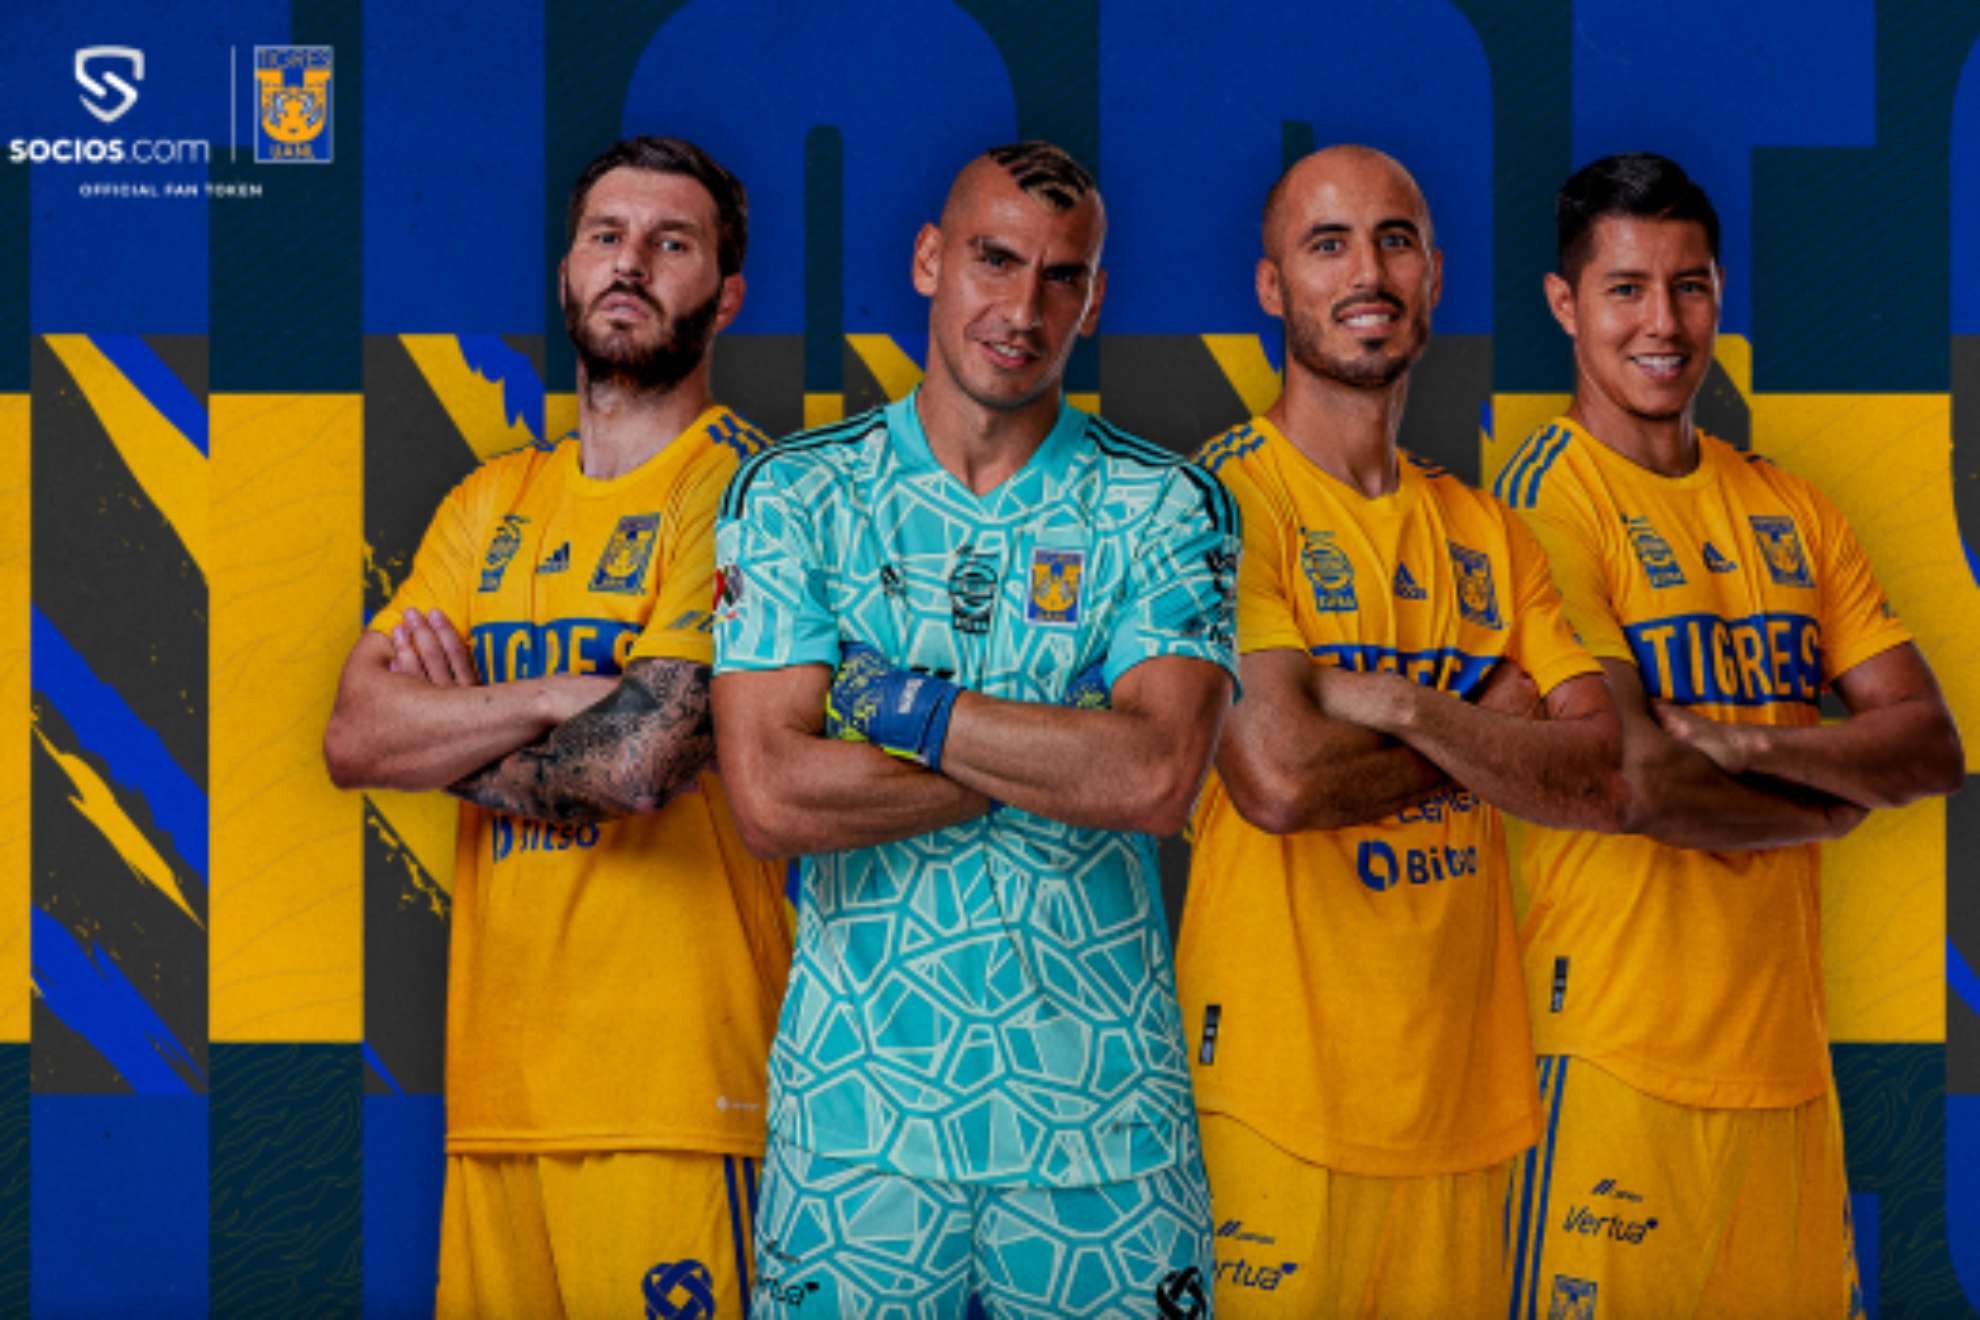 Tigres join the world football giants and launches their fan token on Socios.com